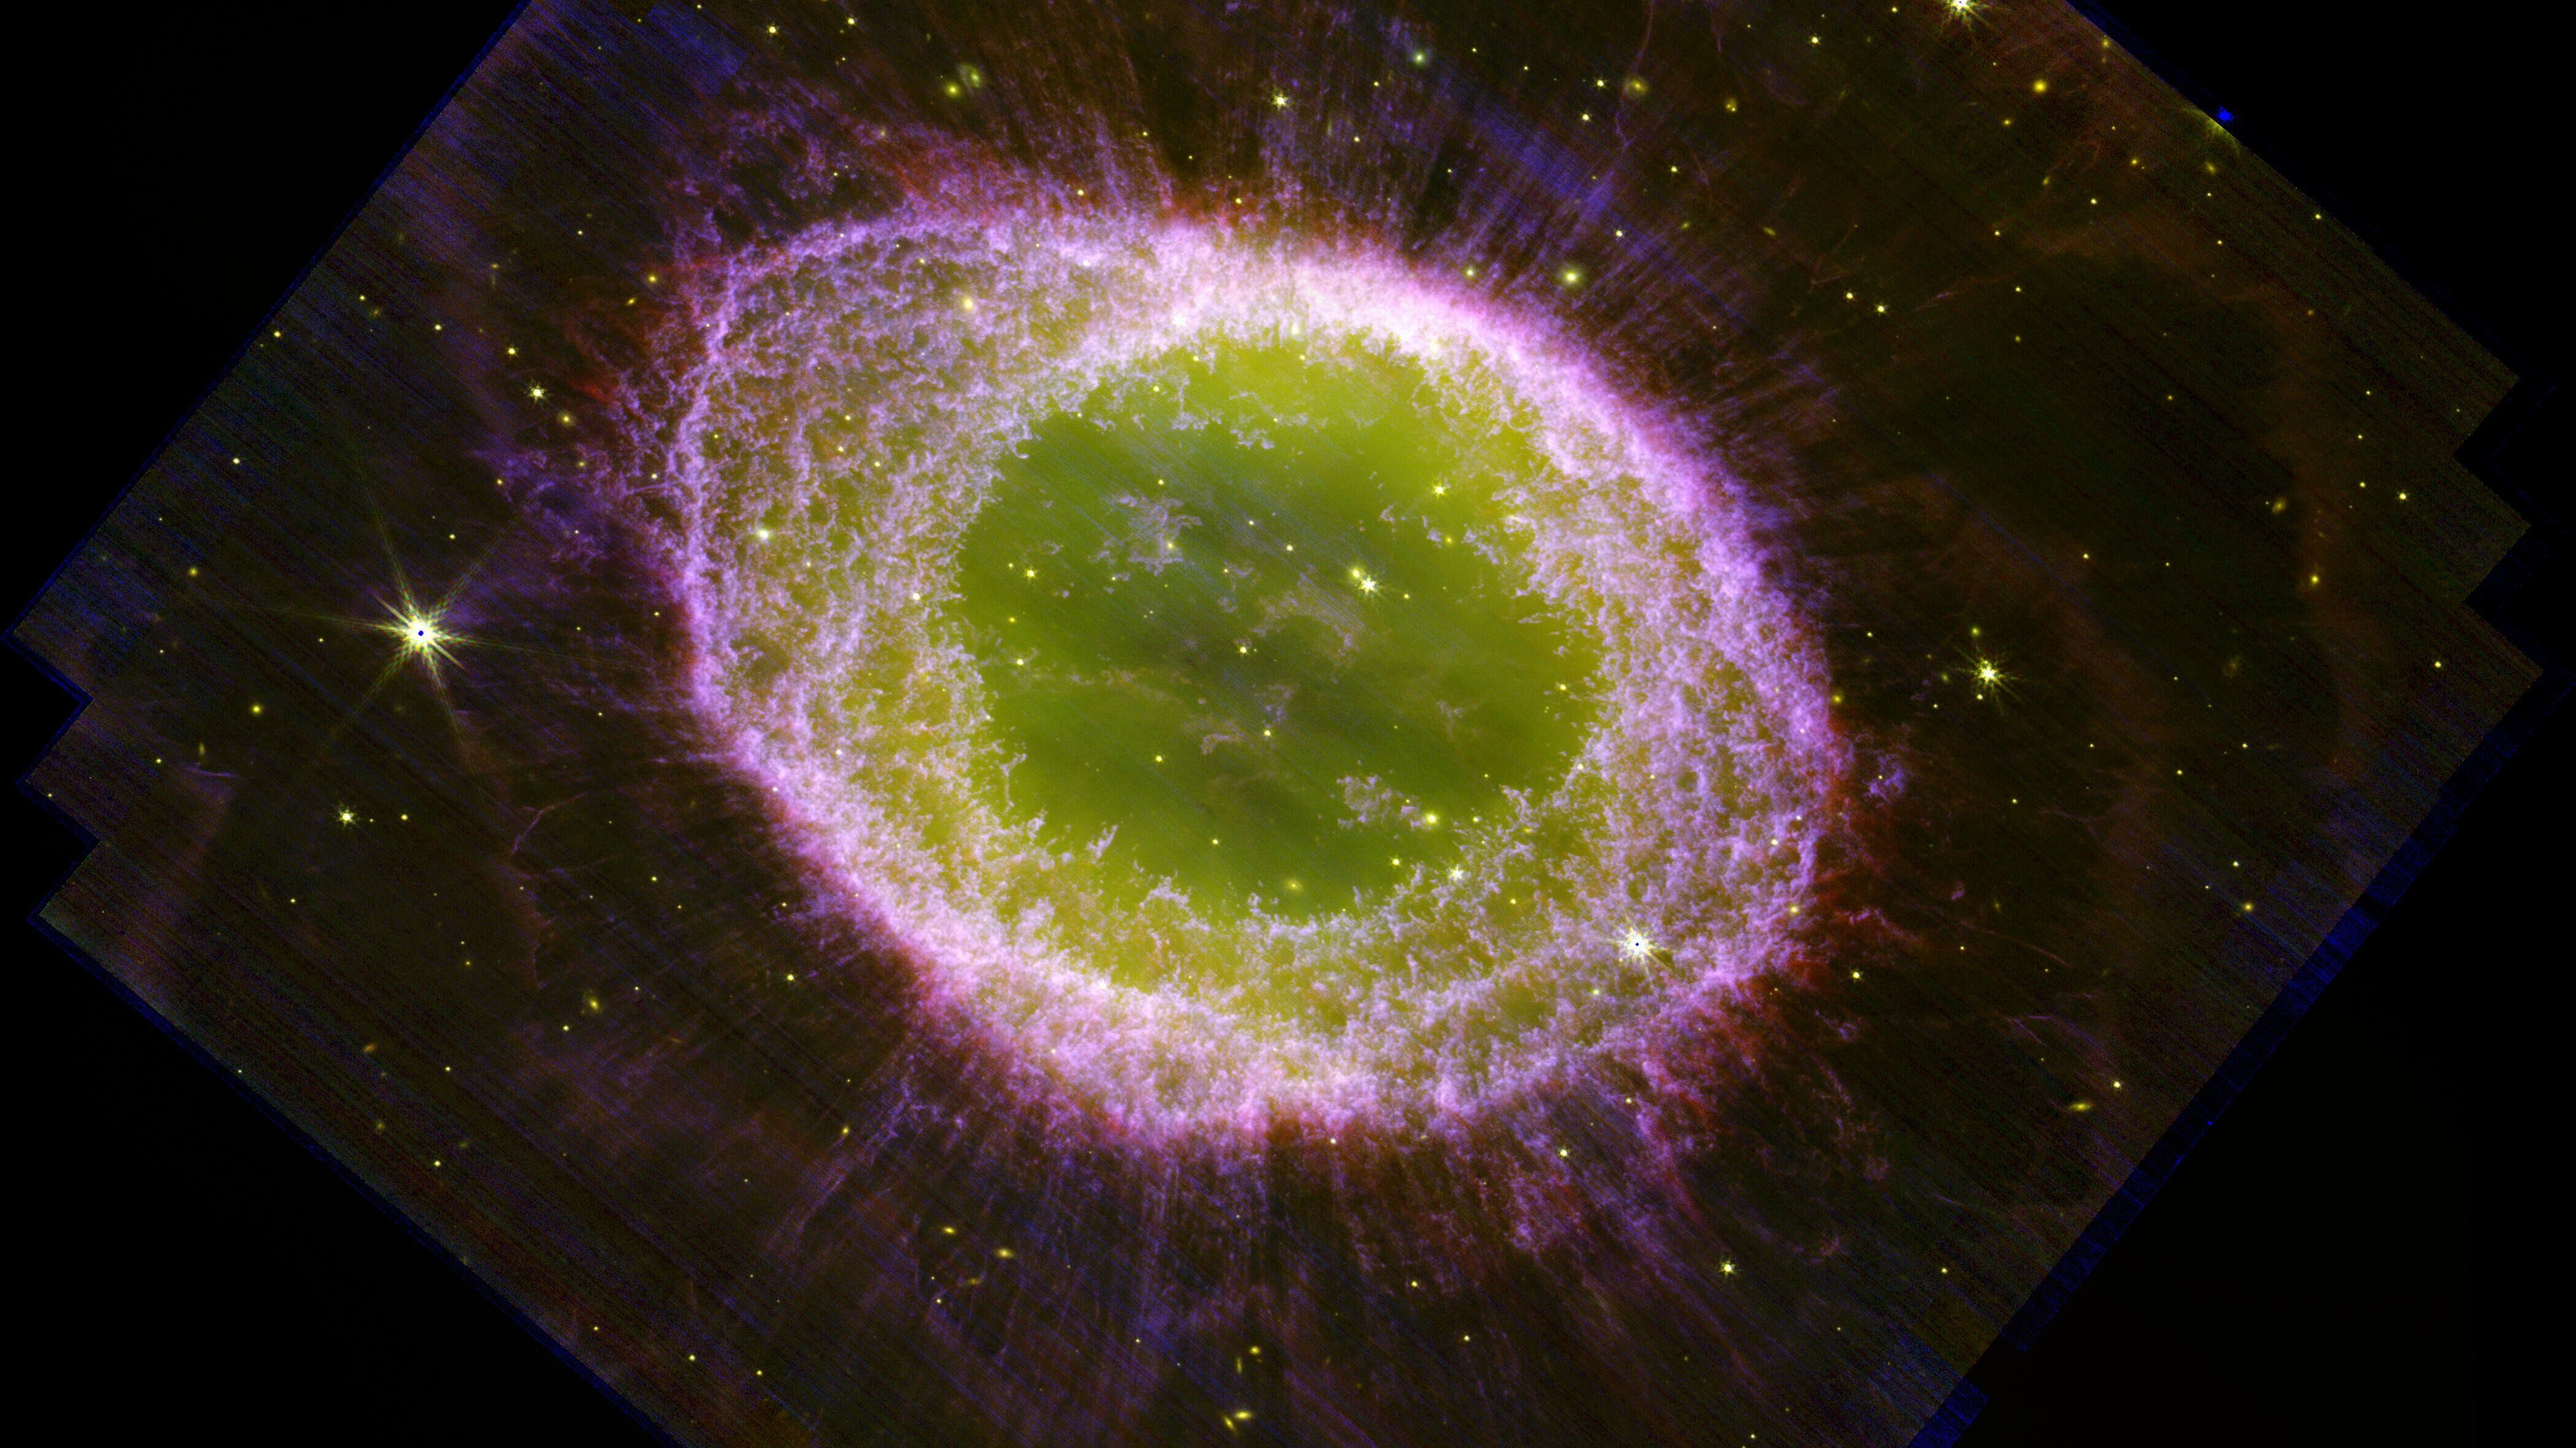 The James Webb Space Telescope has captured detailed new images of the Ring Nebula (JWST/NIRcam)